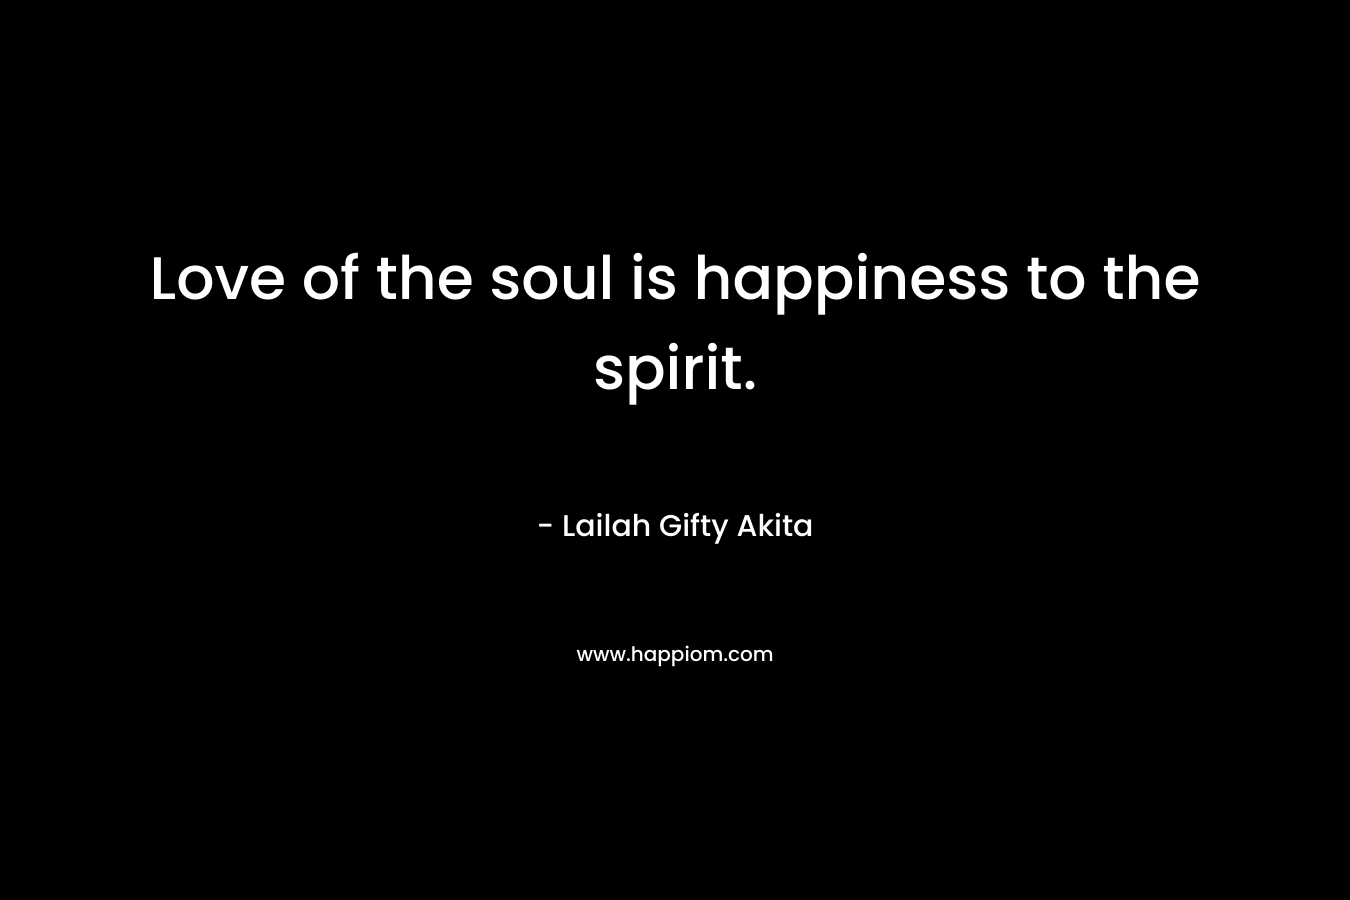 Love of the soul is happiness to the spirit.